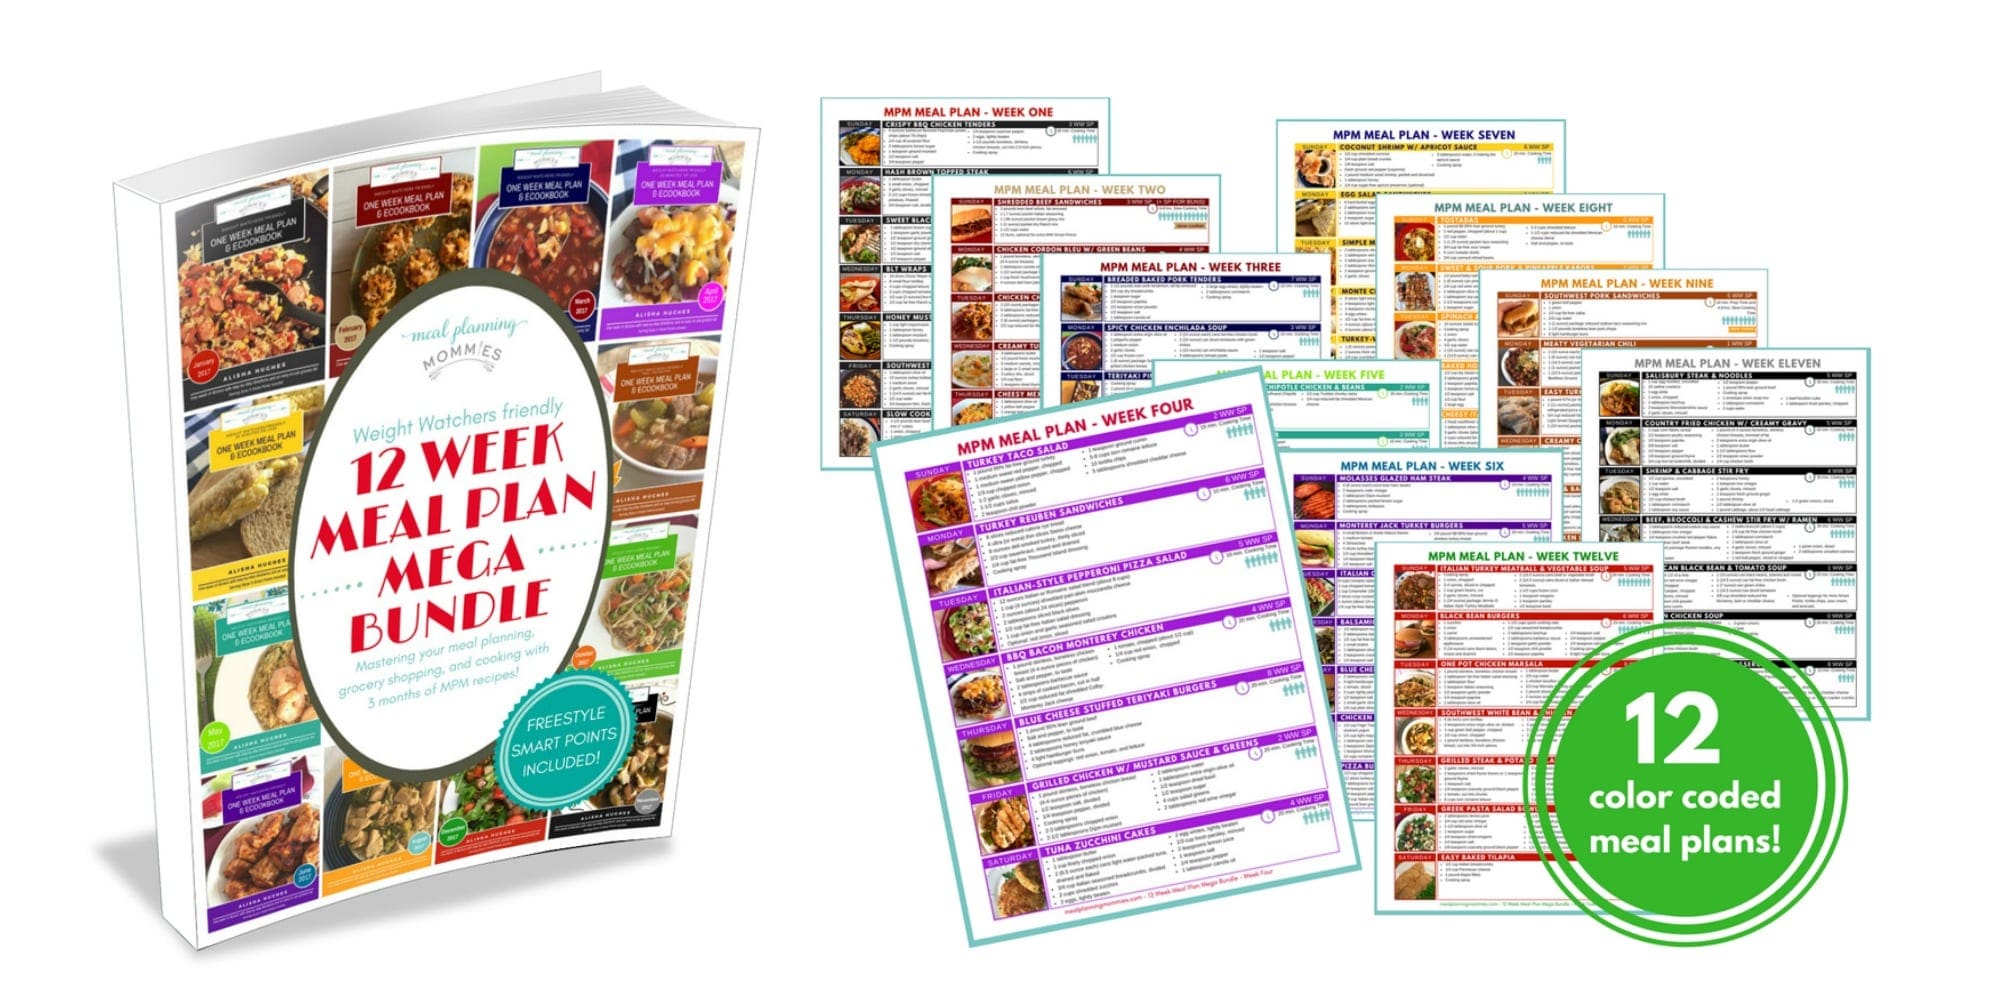 I love this "12 Week Meal Plan Mega Bundle" ebook from Meal Planning Mommies. All recipes include WW FreeStyle SmartPoints per serving.